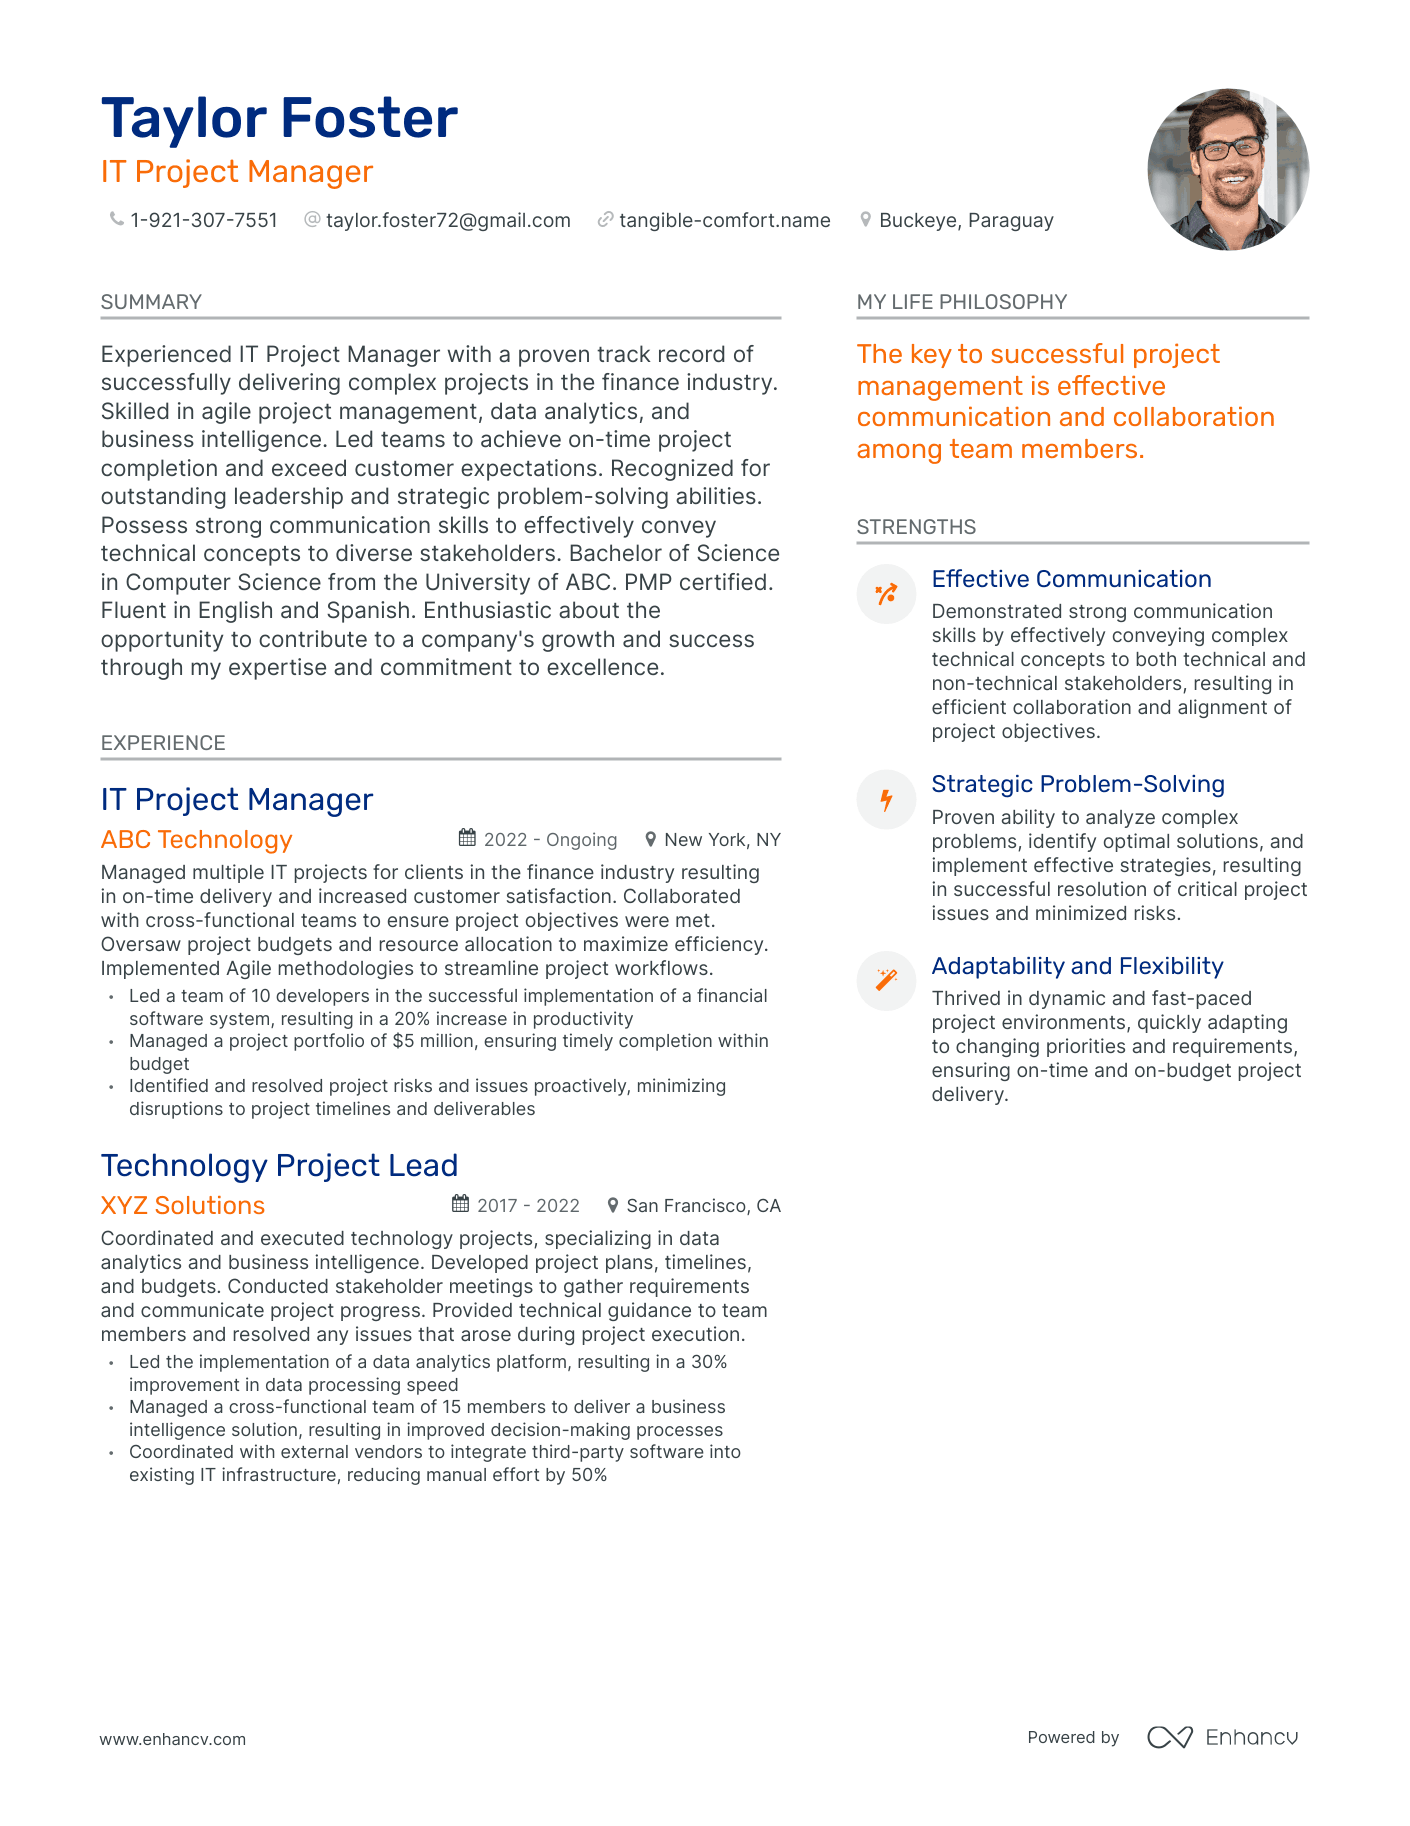 IT Project Manager resume example